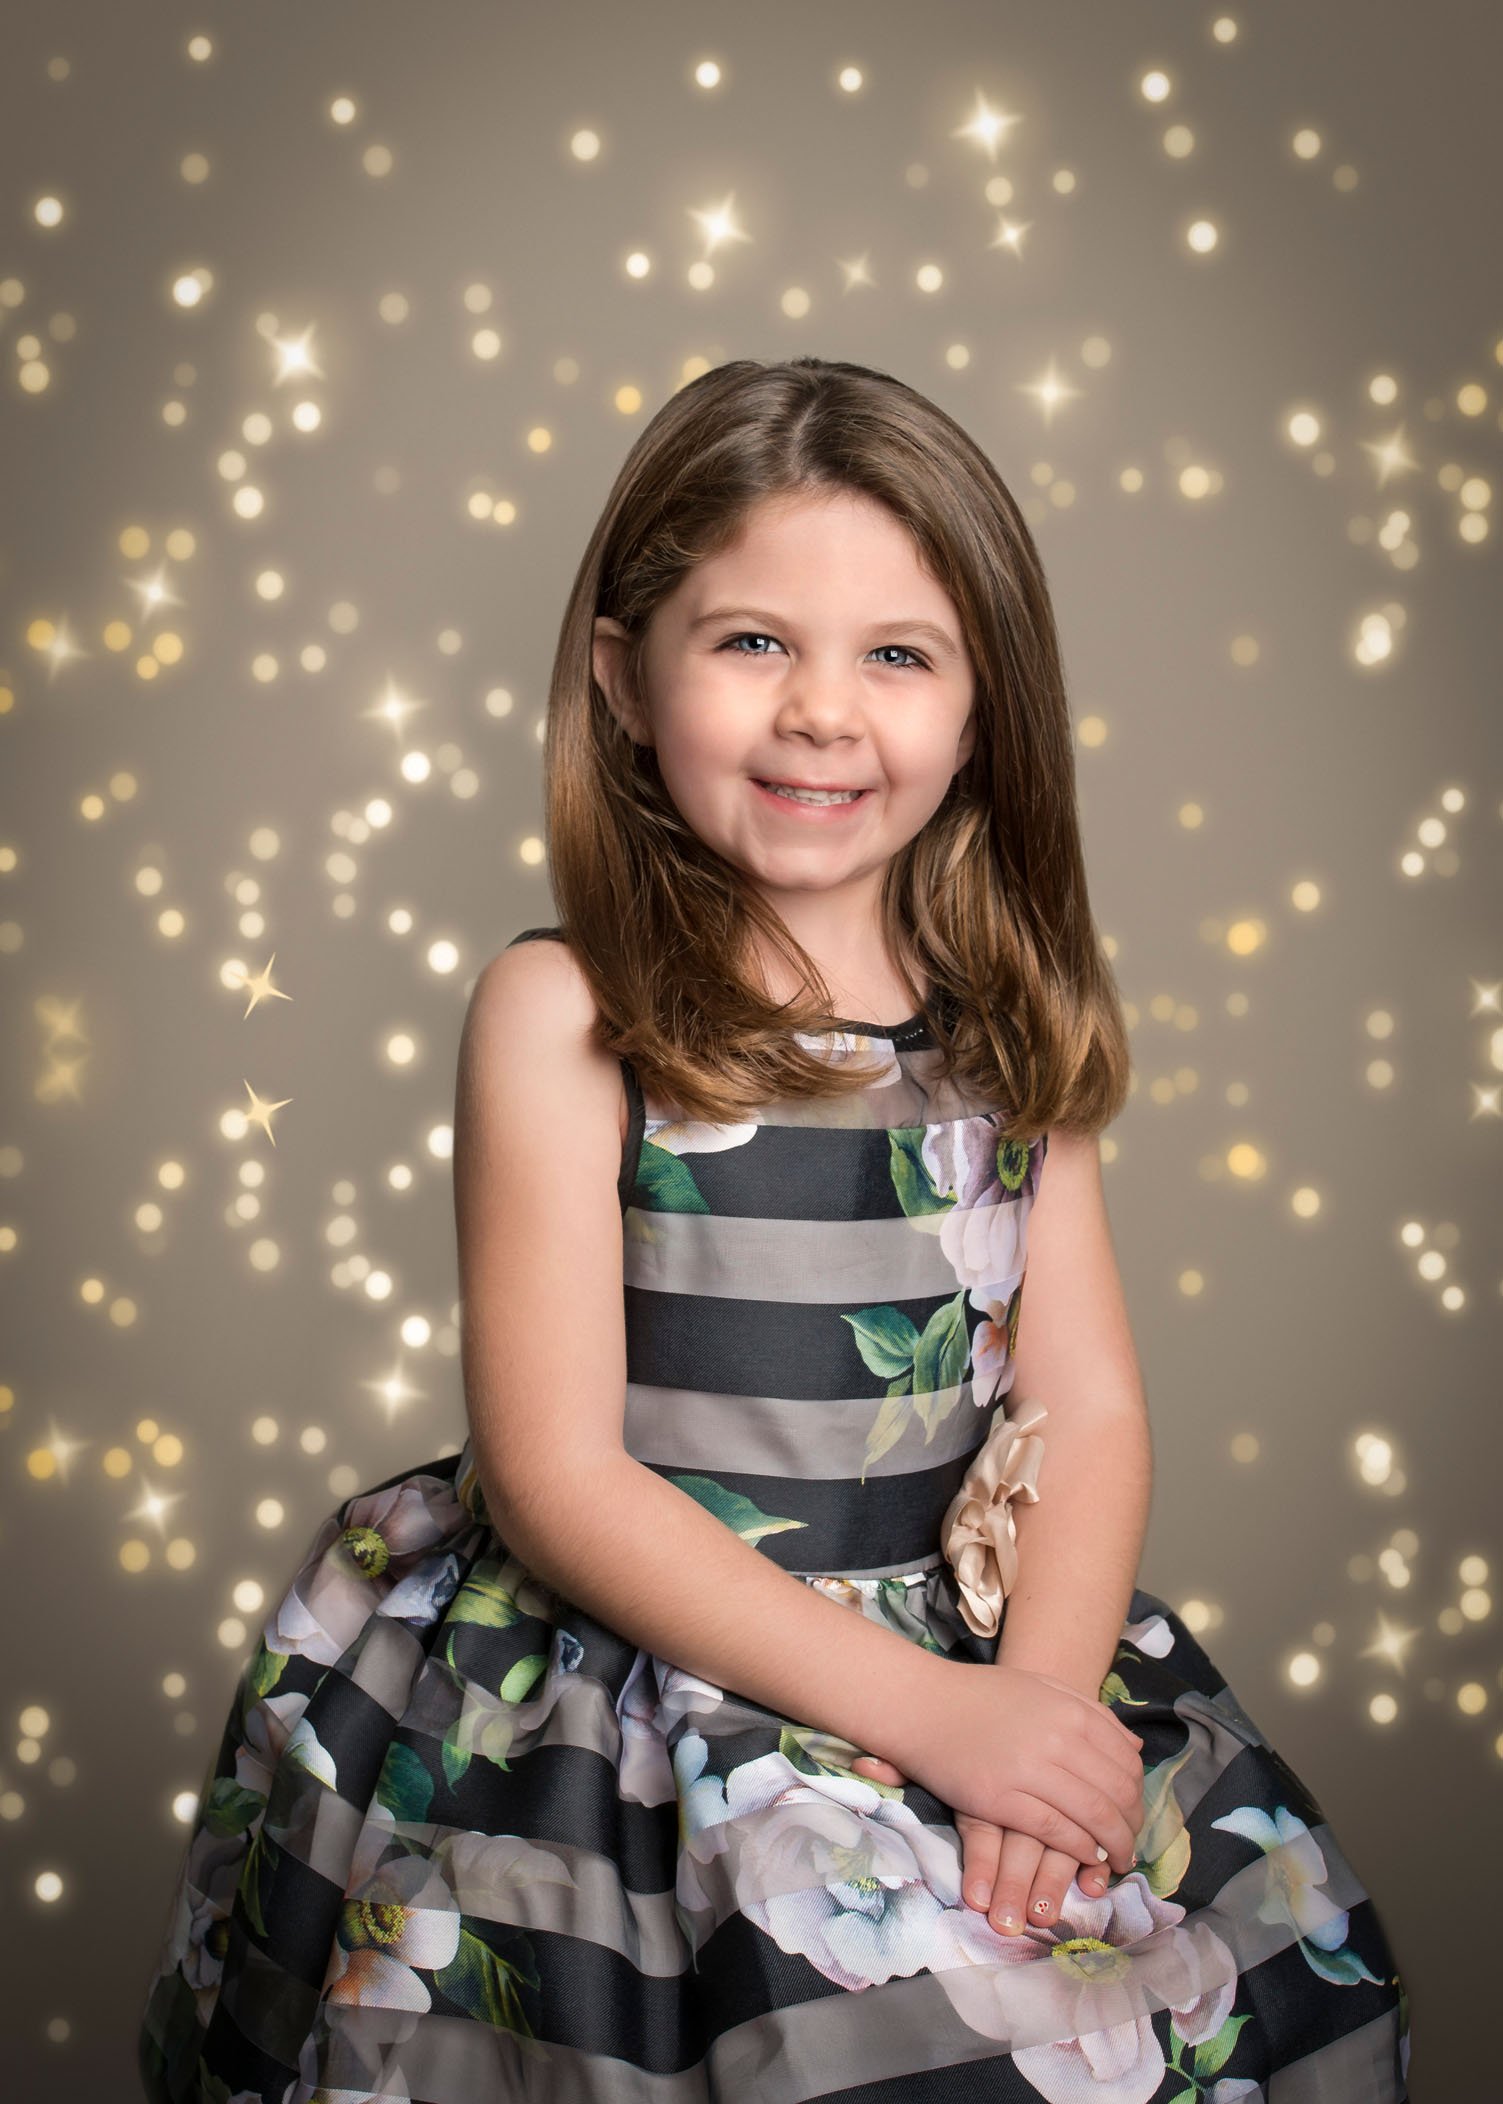 5 year old girl sitting in pretty dress with bokeh lights